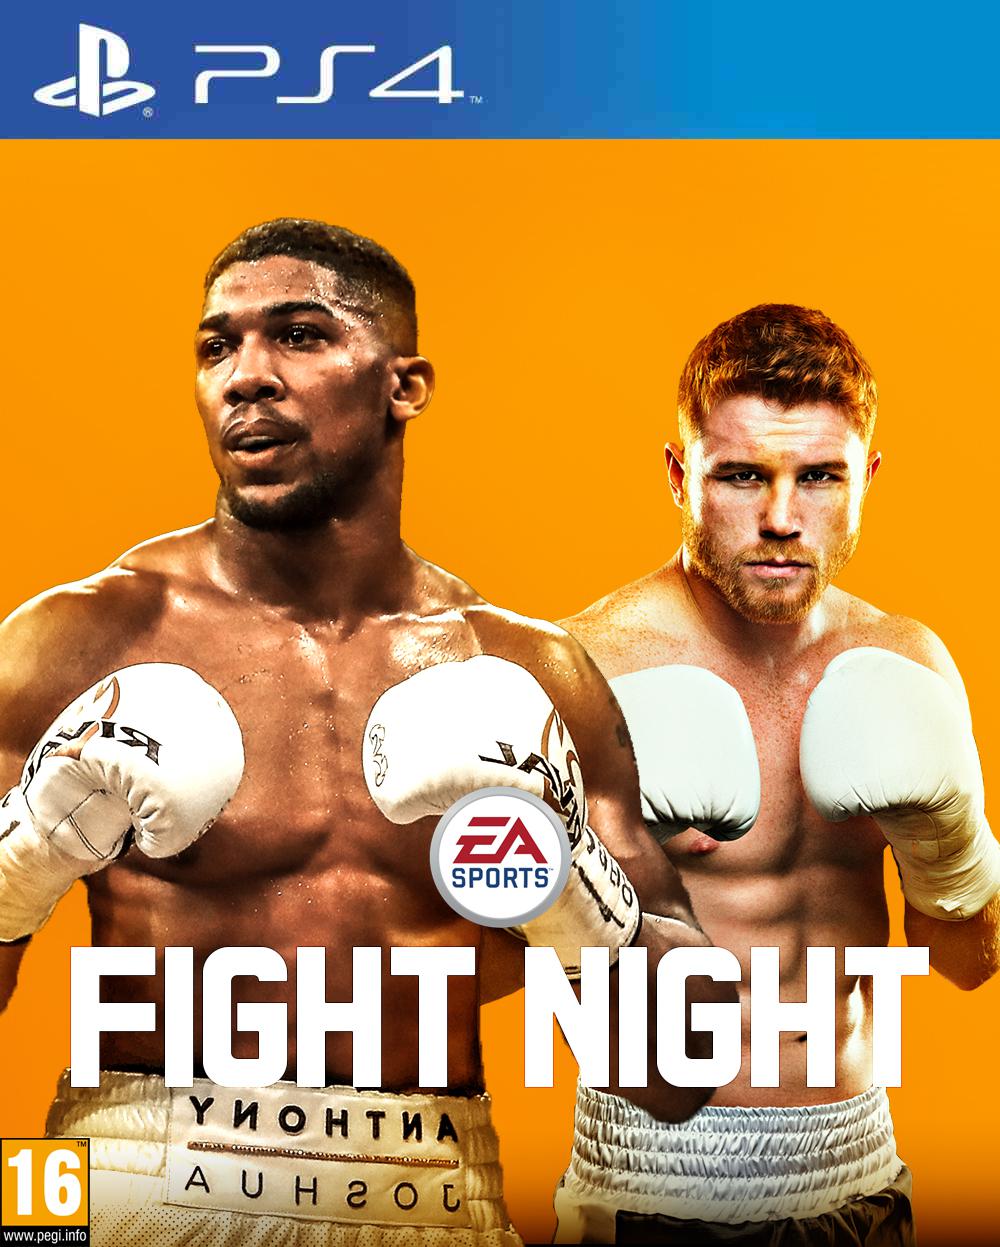 [Image] Made a cover for a current gen Fight Night game : PS4